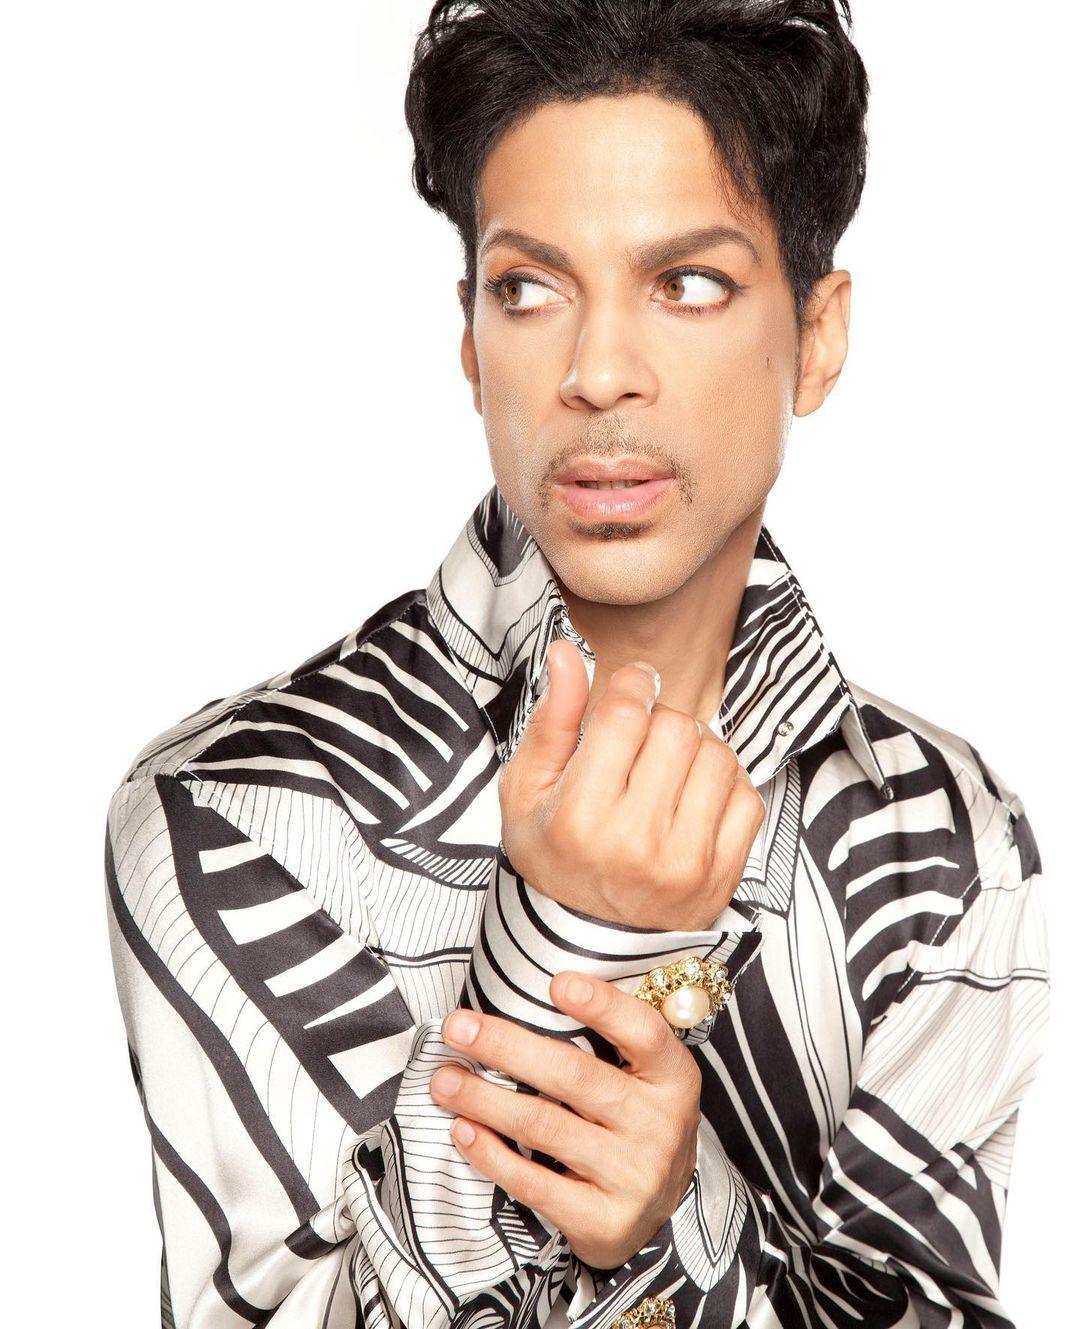 A photo showing Prince in a striped outfit, with gorgeous hair.